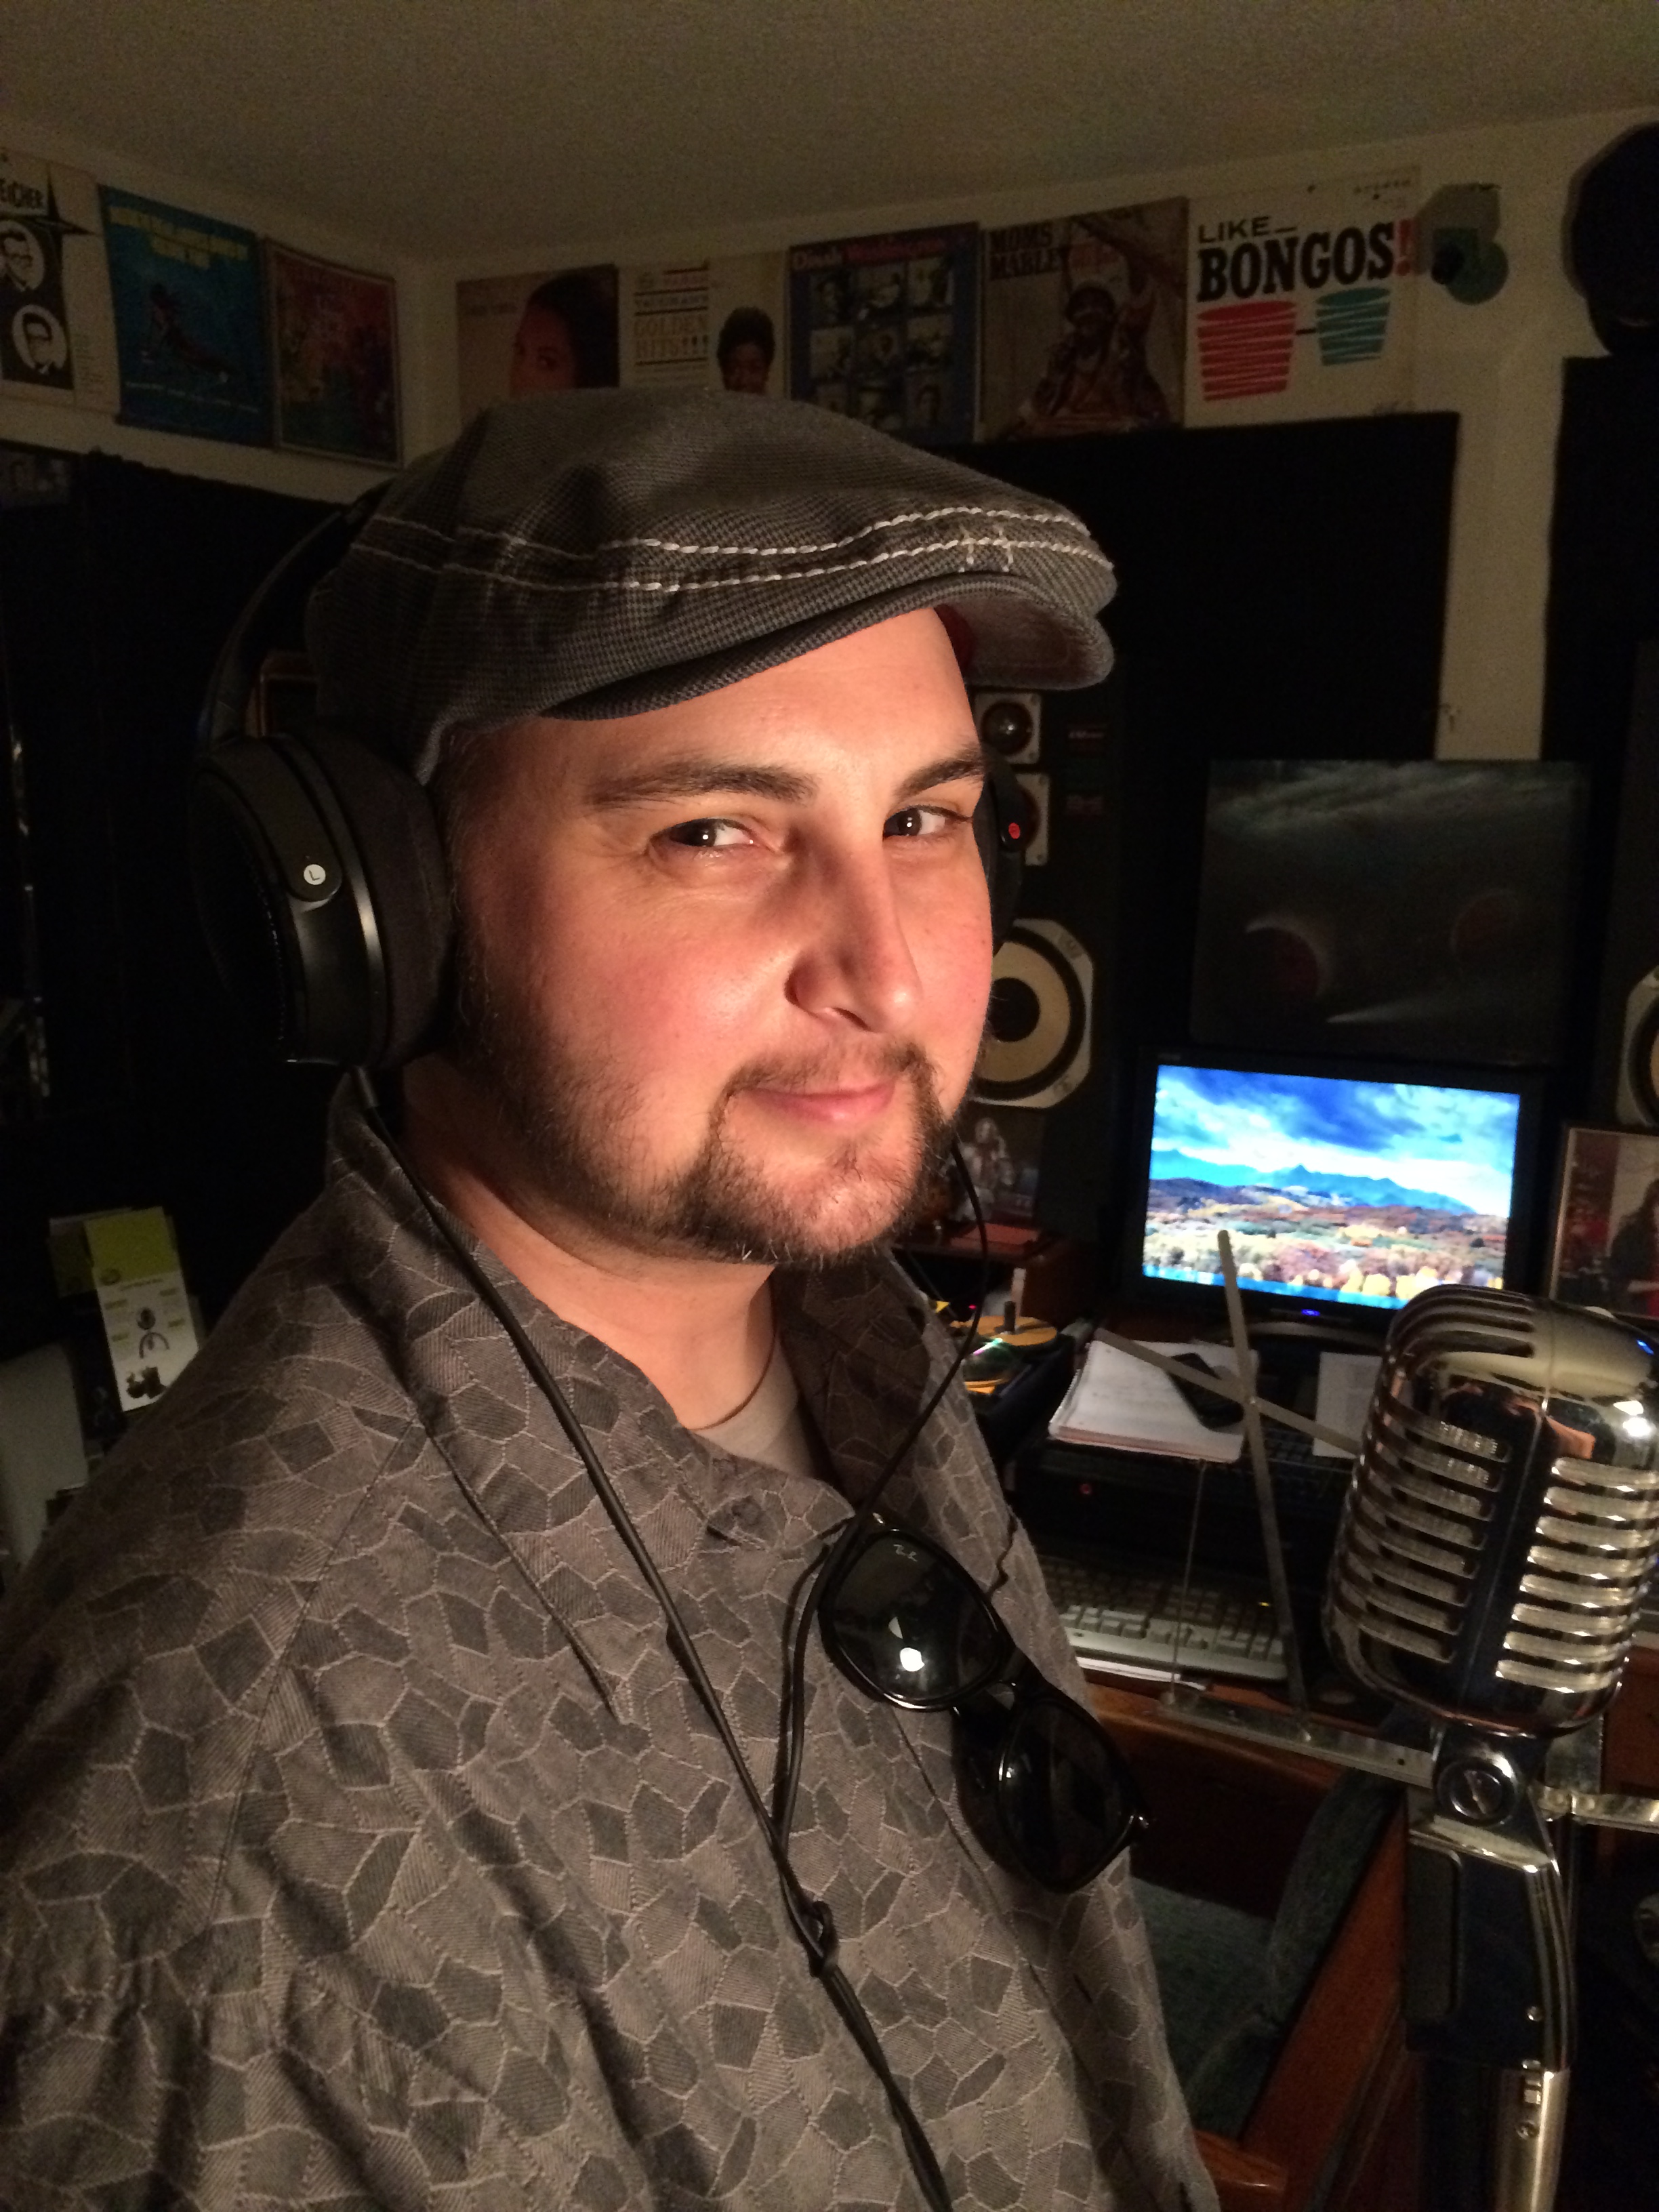 Vsliant doing character, narrations, and radio advert voice overs in a Los Angeles studio.